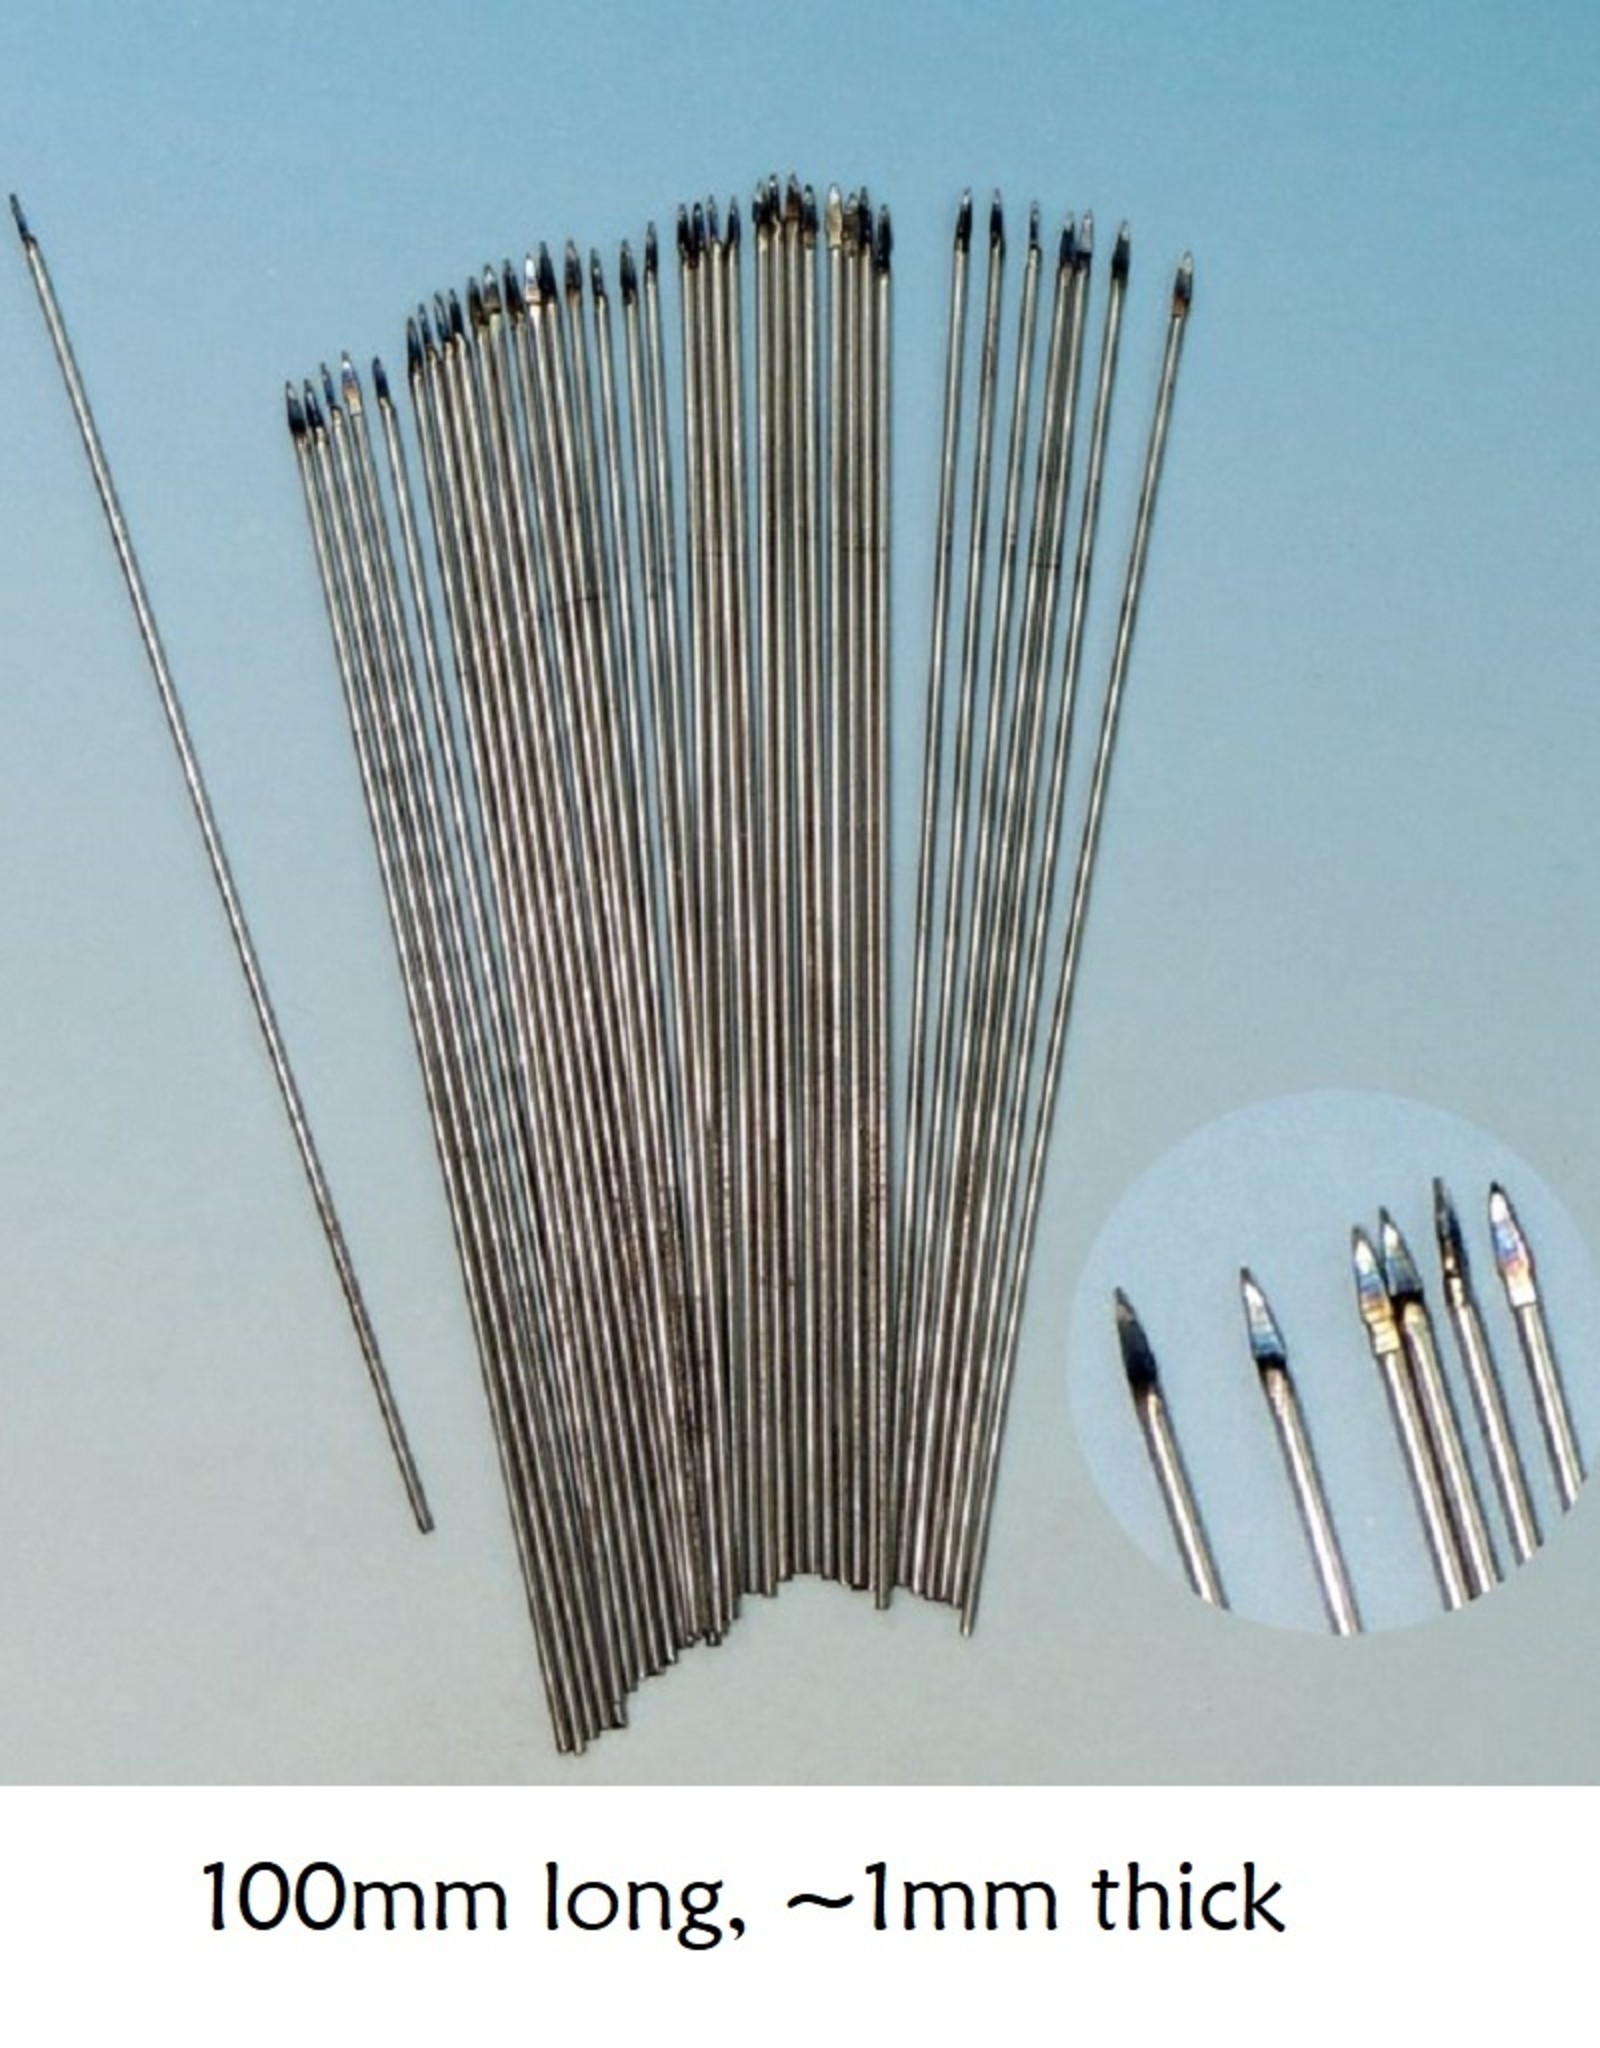 North Star 100mm long wire spears (x20)